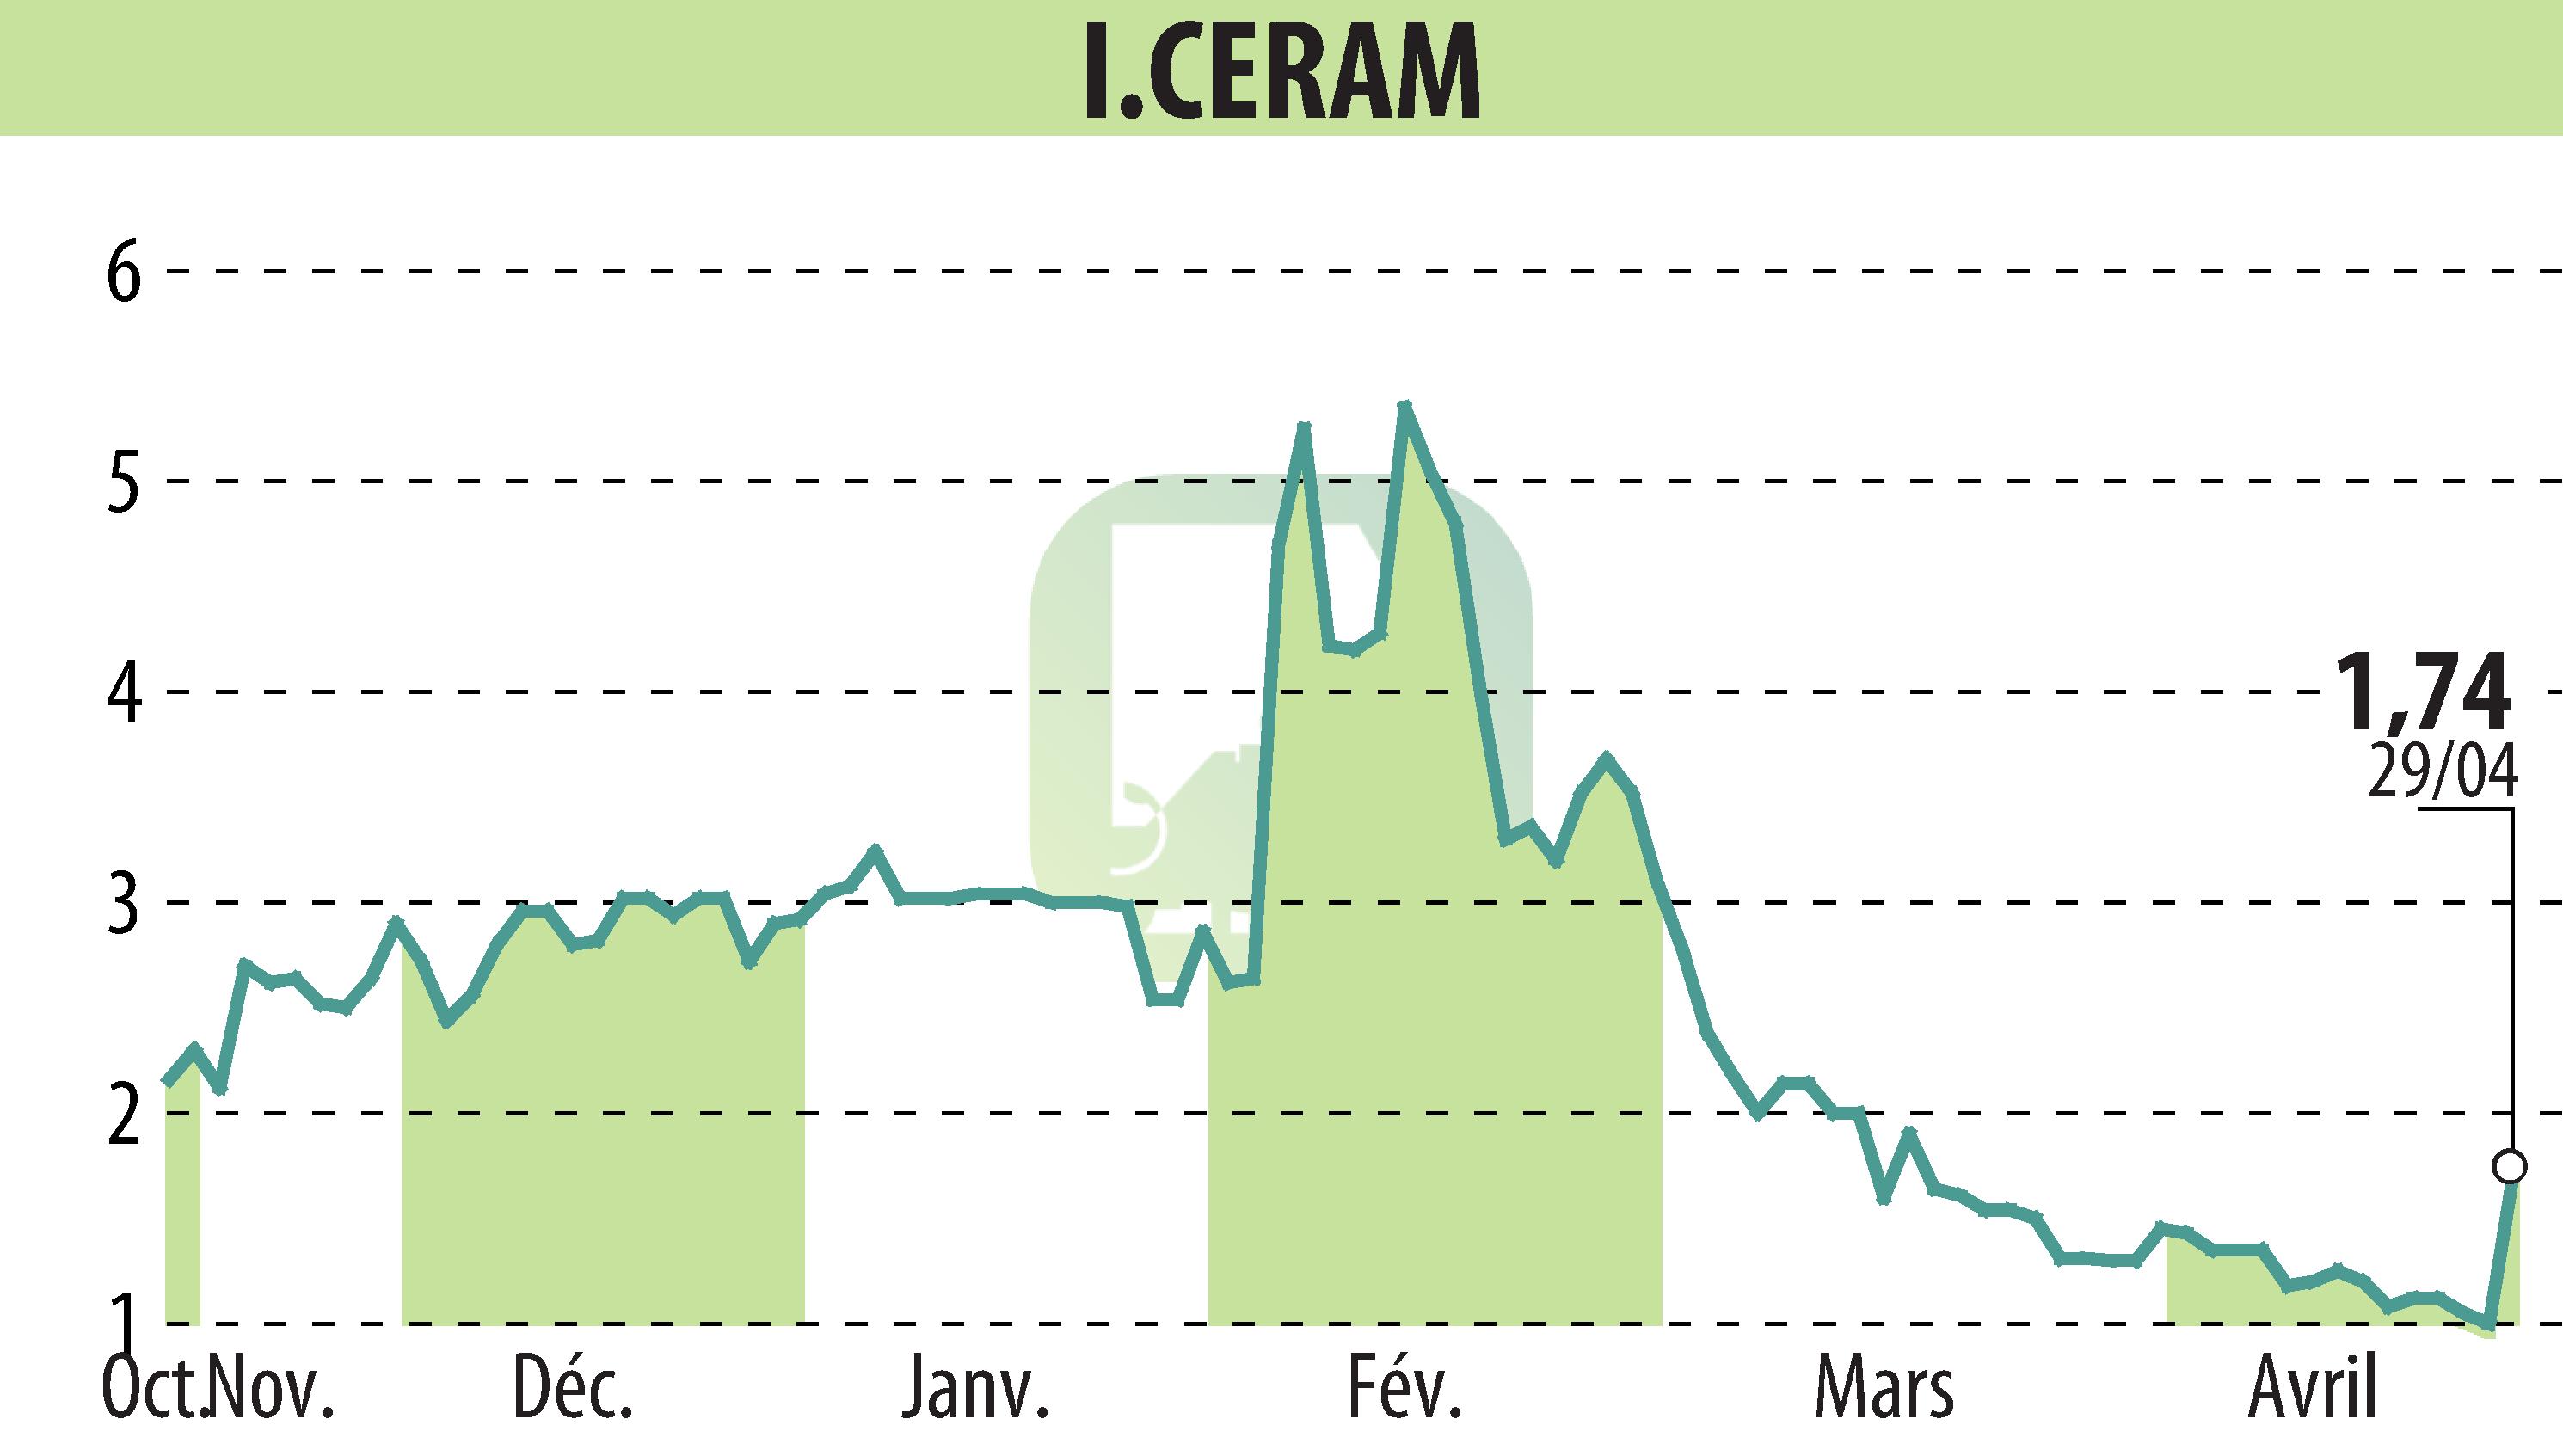 Stock price chart of I-CERAM (EPA:ALICR) showing fluctuations.